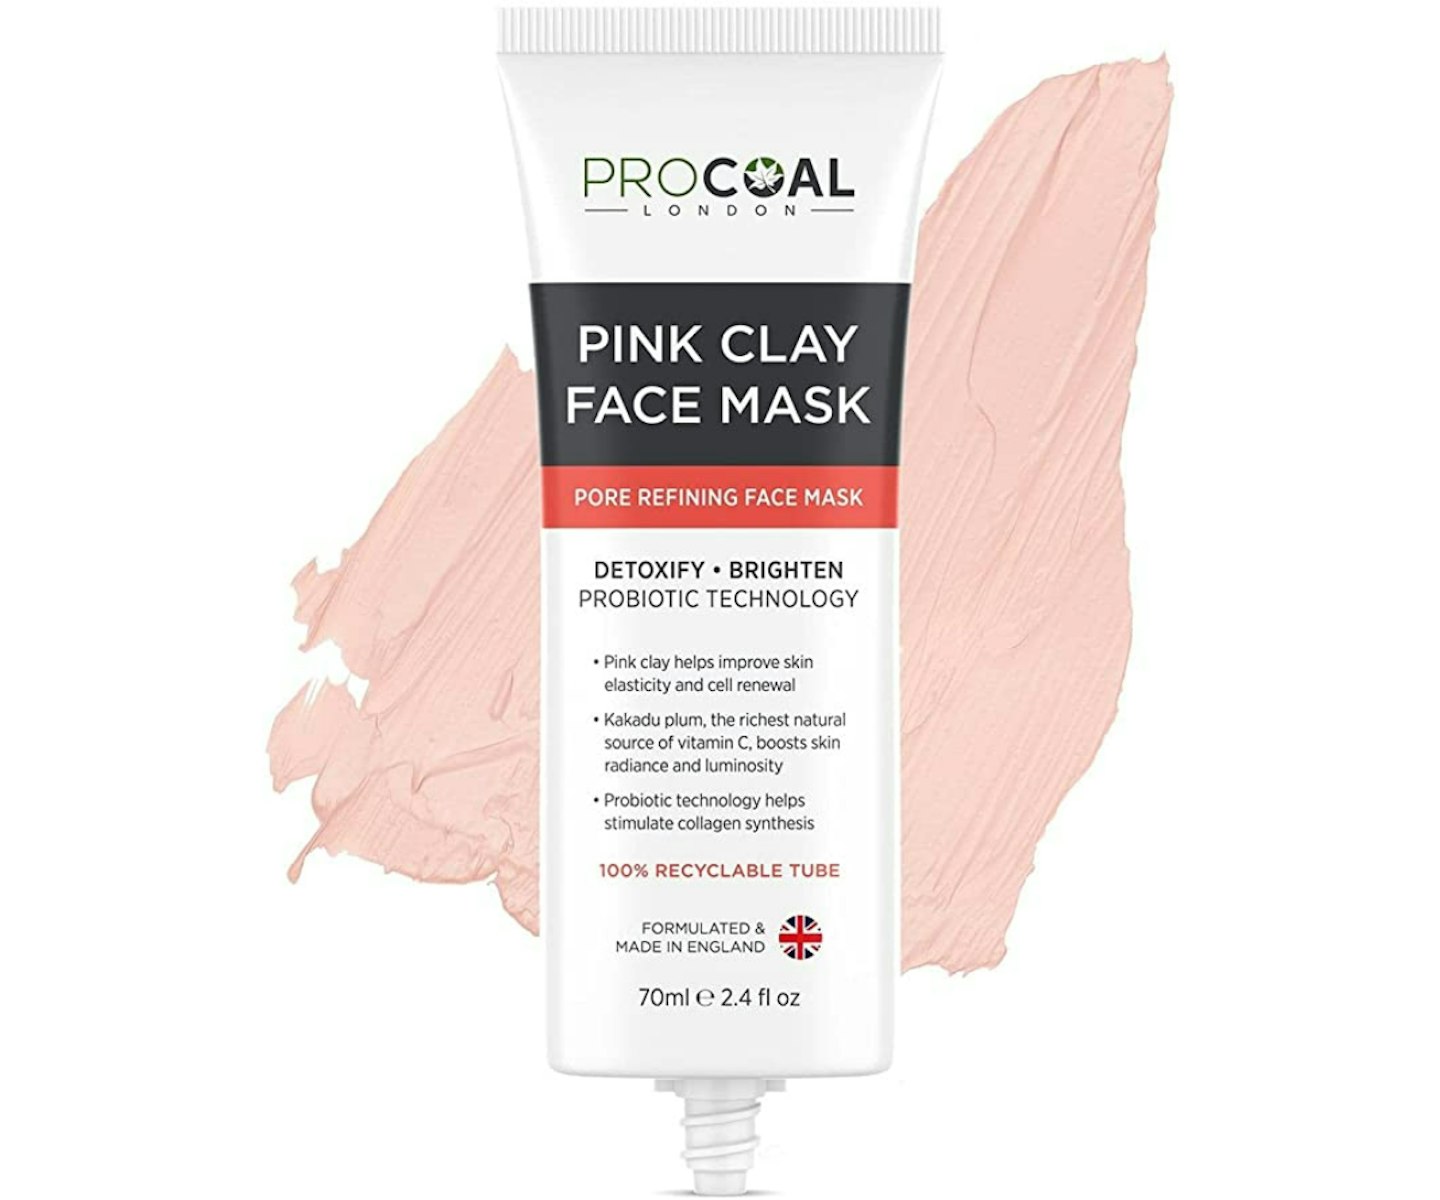 A picture of the Pro Coal Pink Clay Face Mask